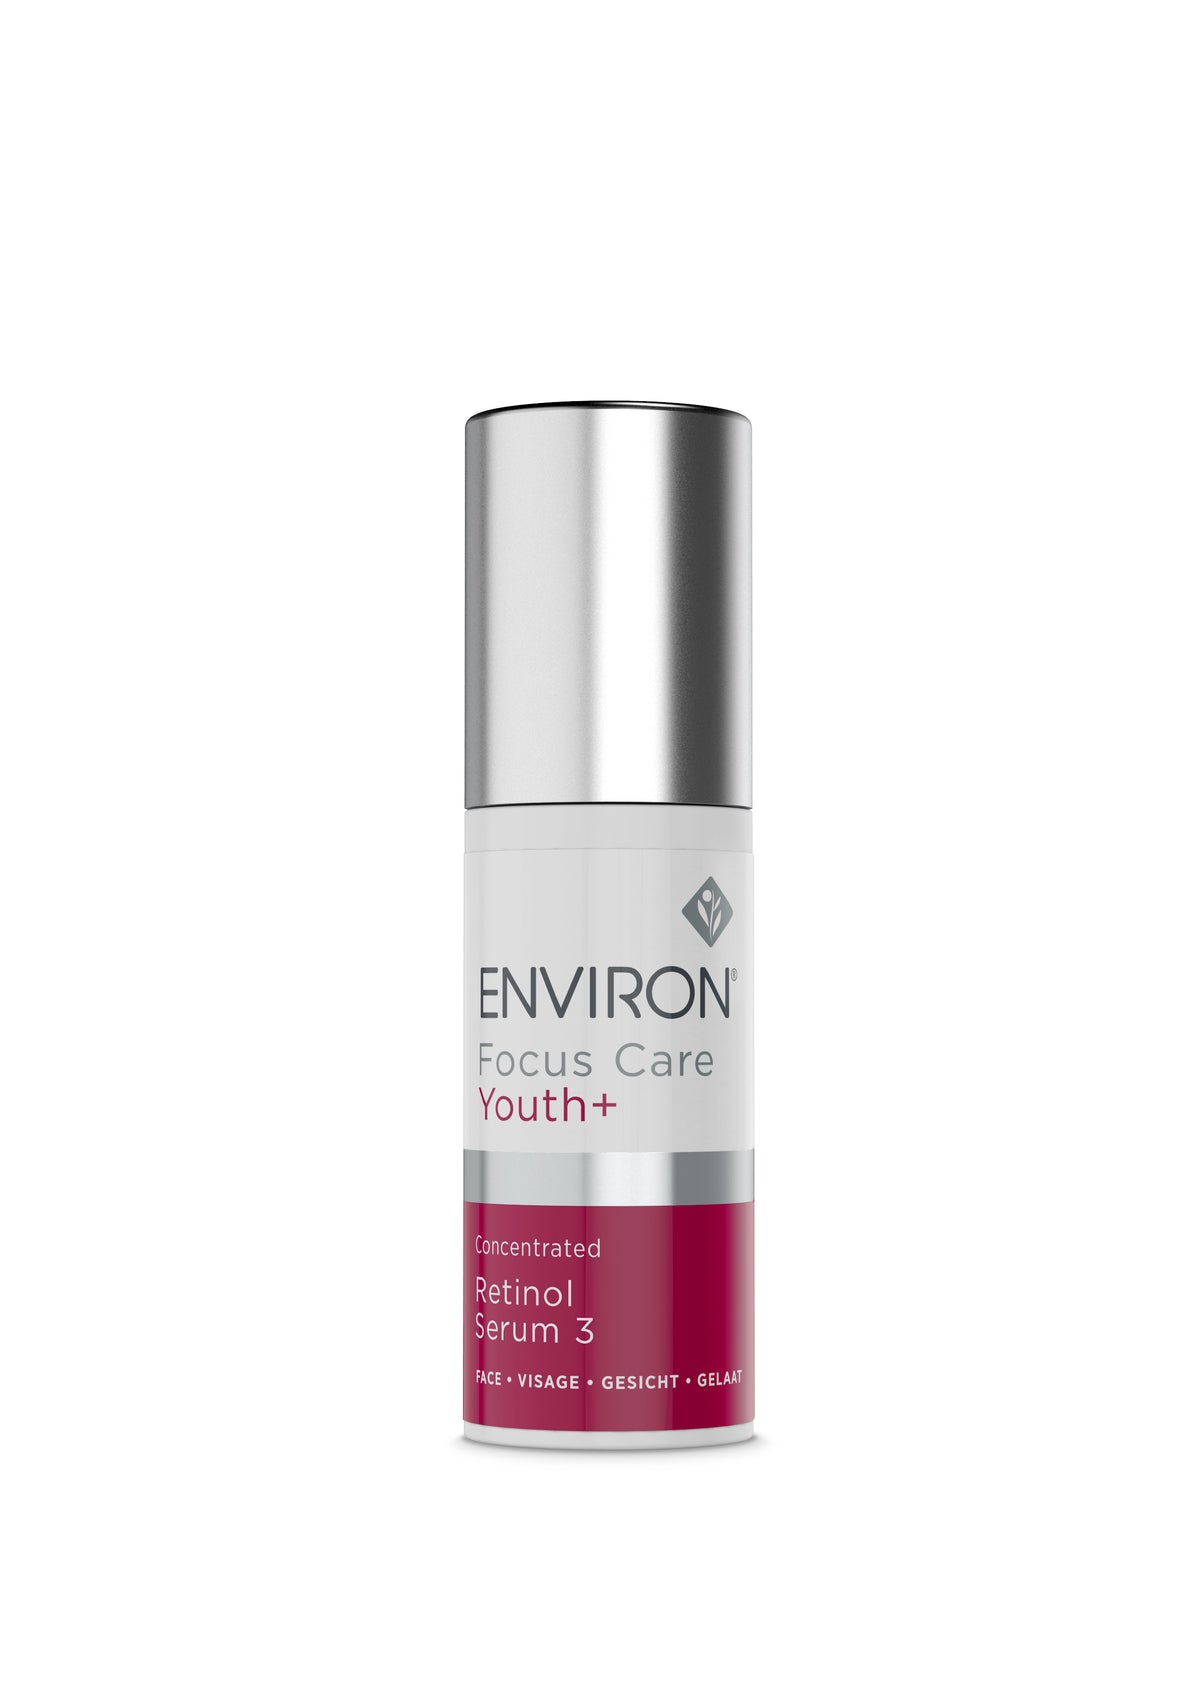 Environ Focus Care Youth + Concentrated Retinol Serum 3